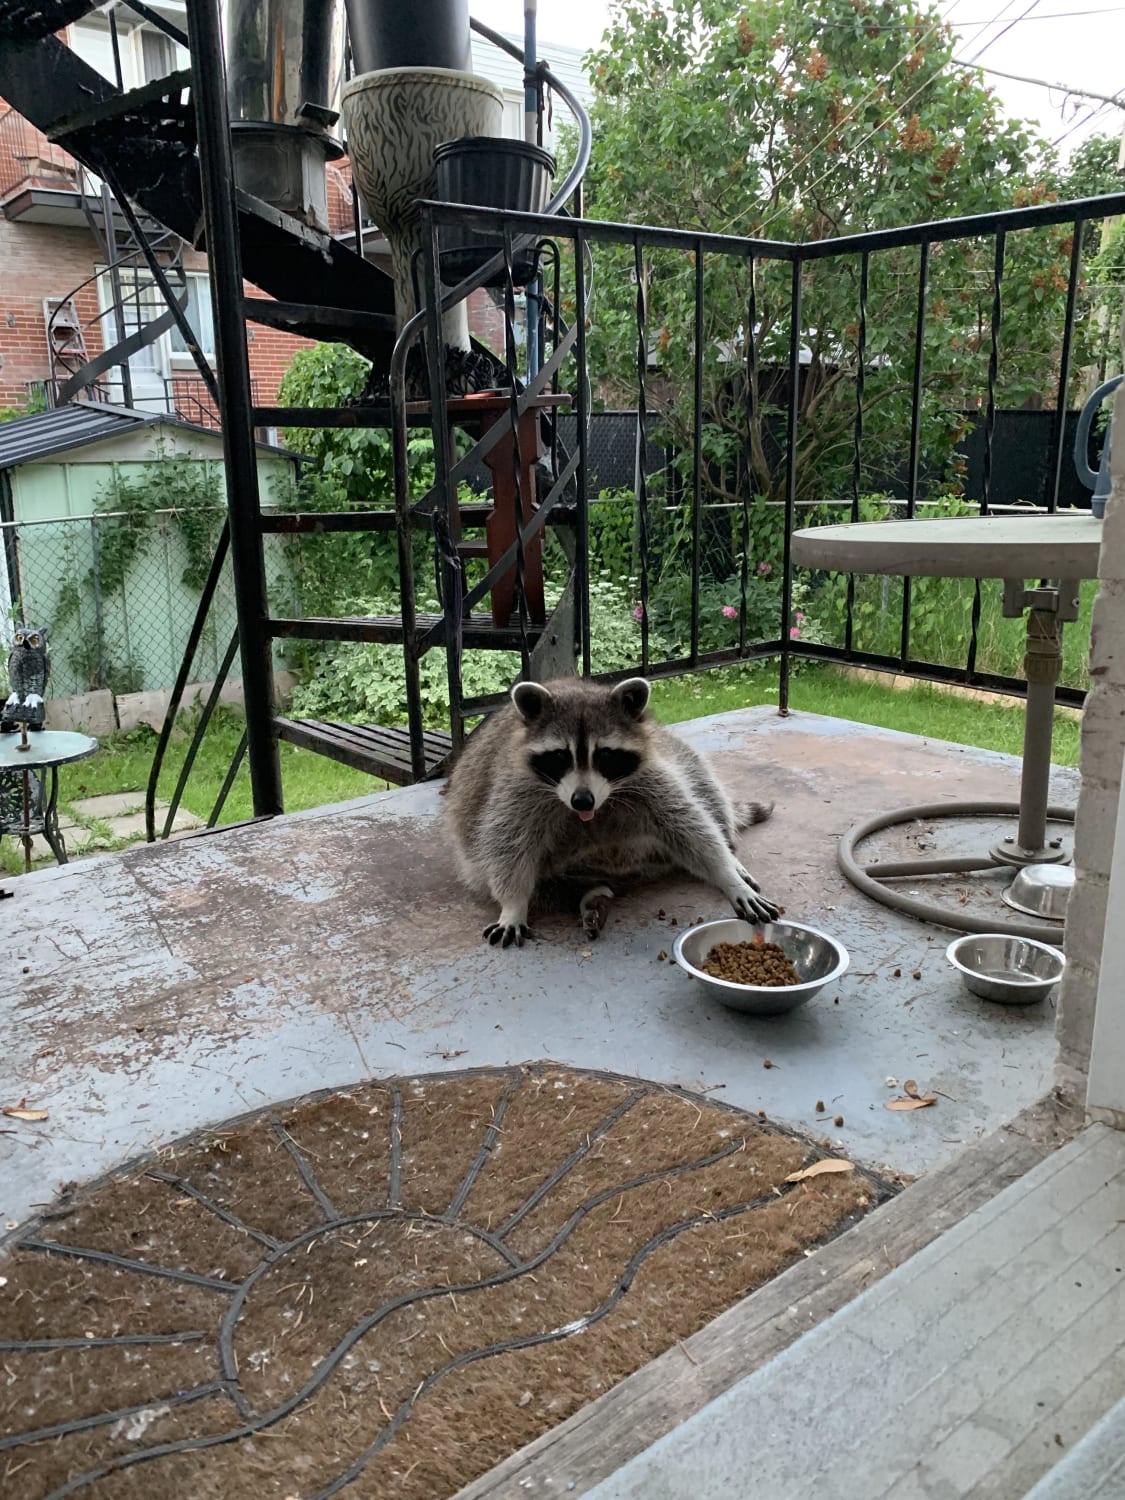 My parents leave food out for the neighbourhood stray cats but today they received another type of visitor